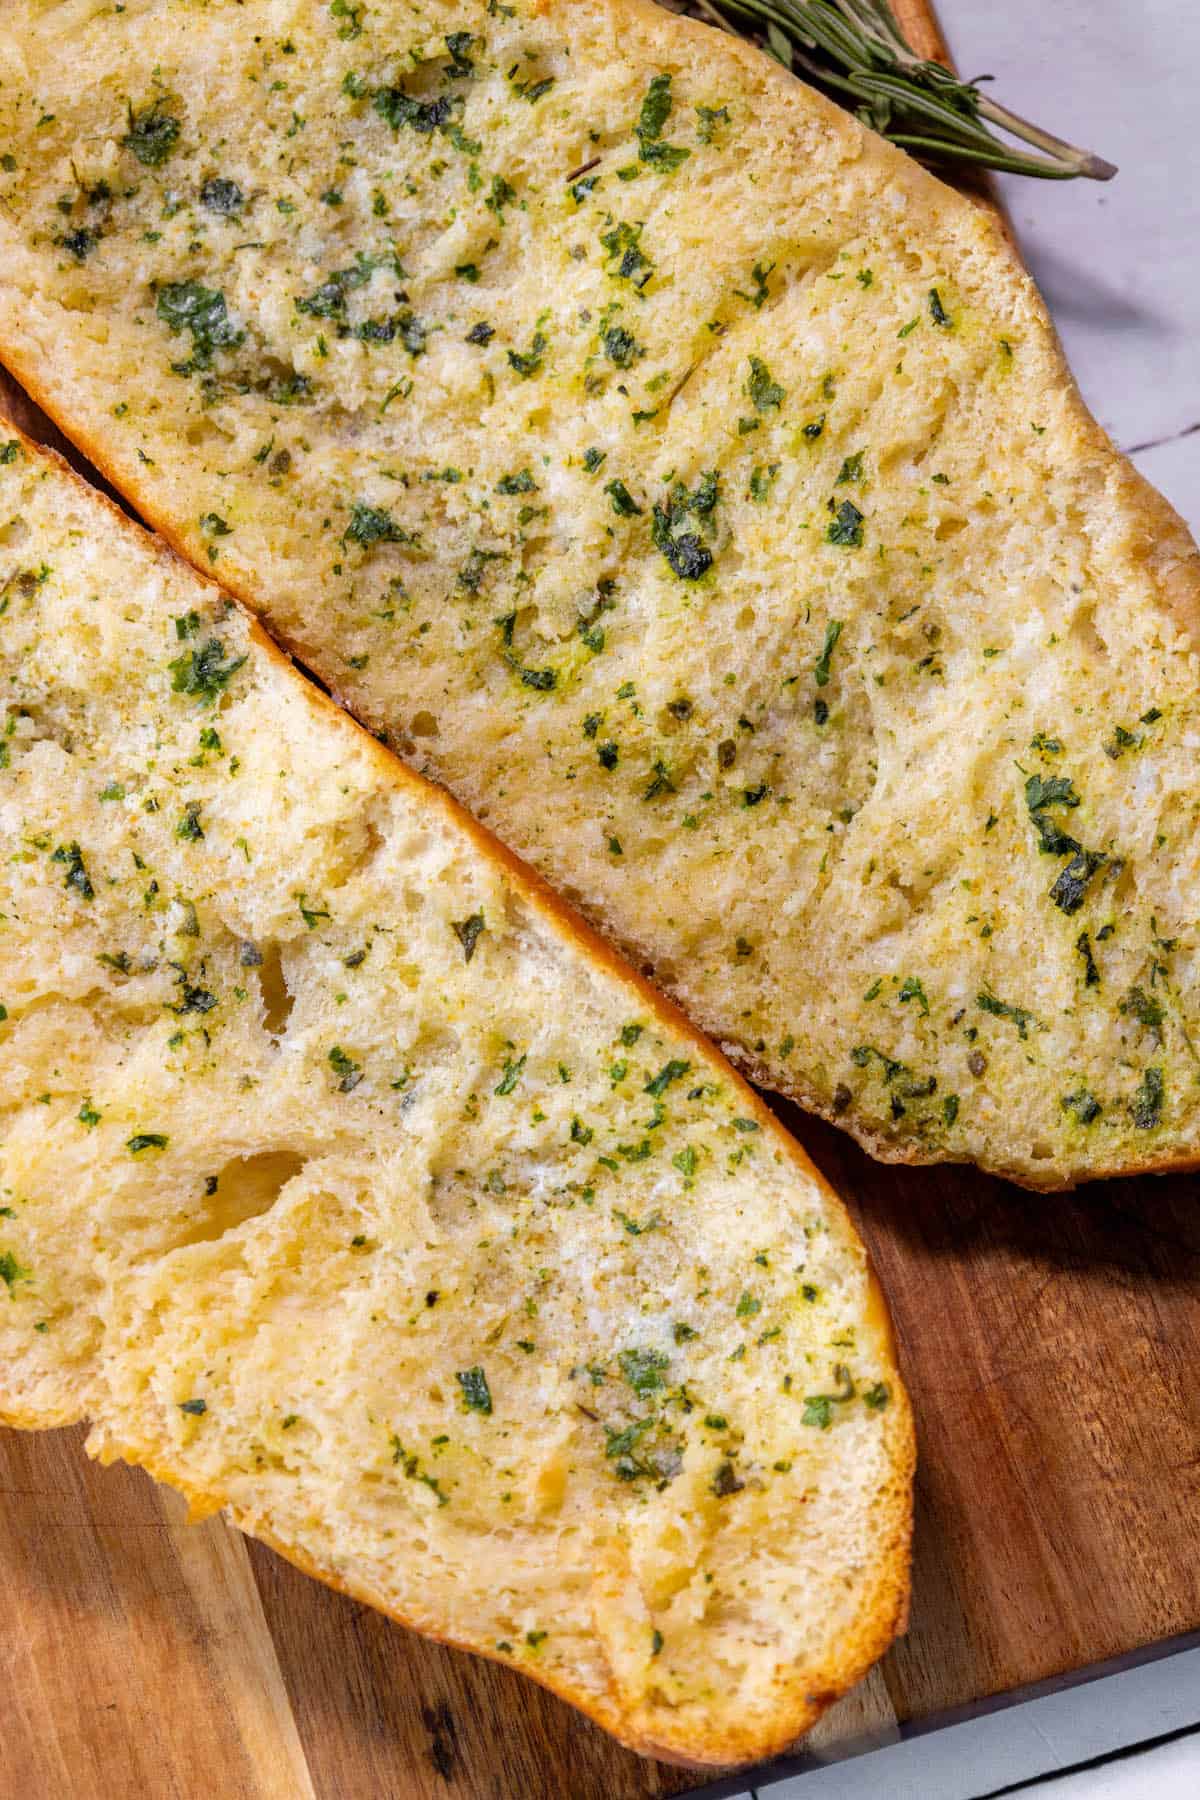 Easy garlic bread made with two slices of bread and herbs on a cutting board.